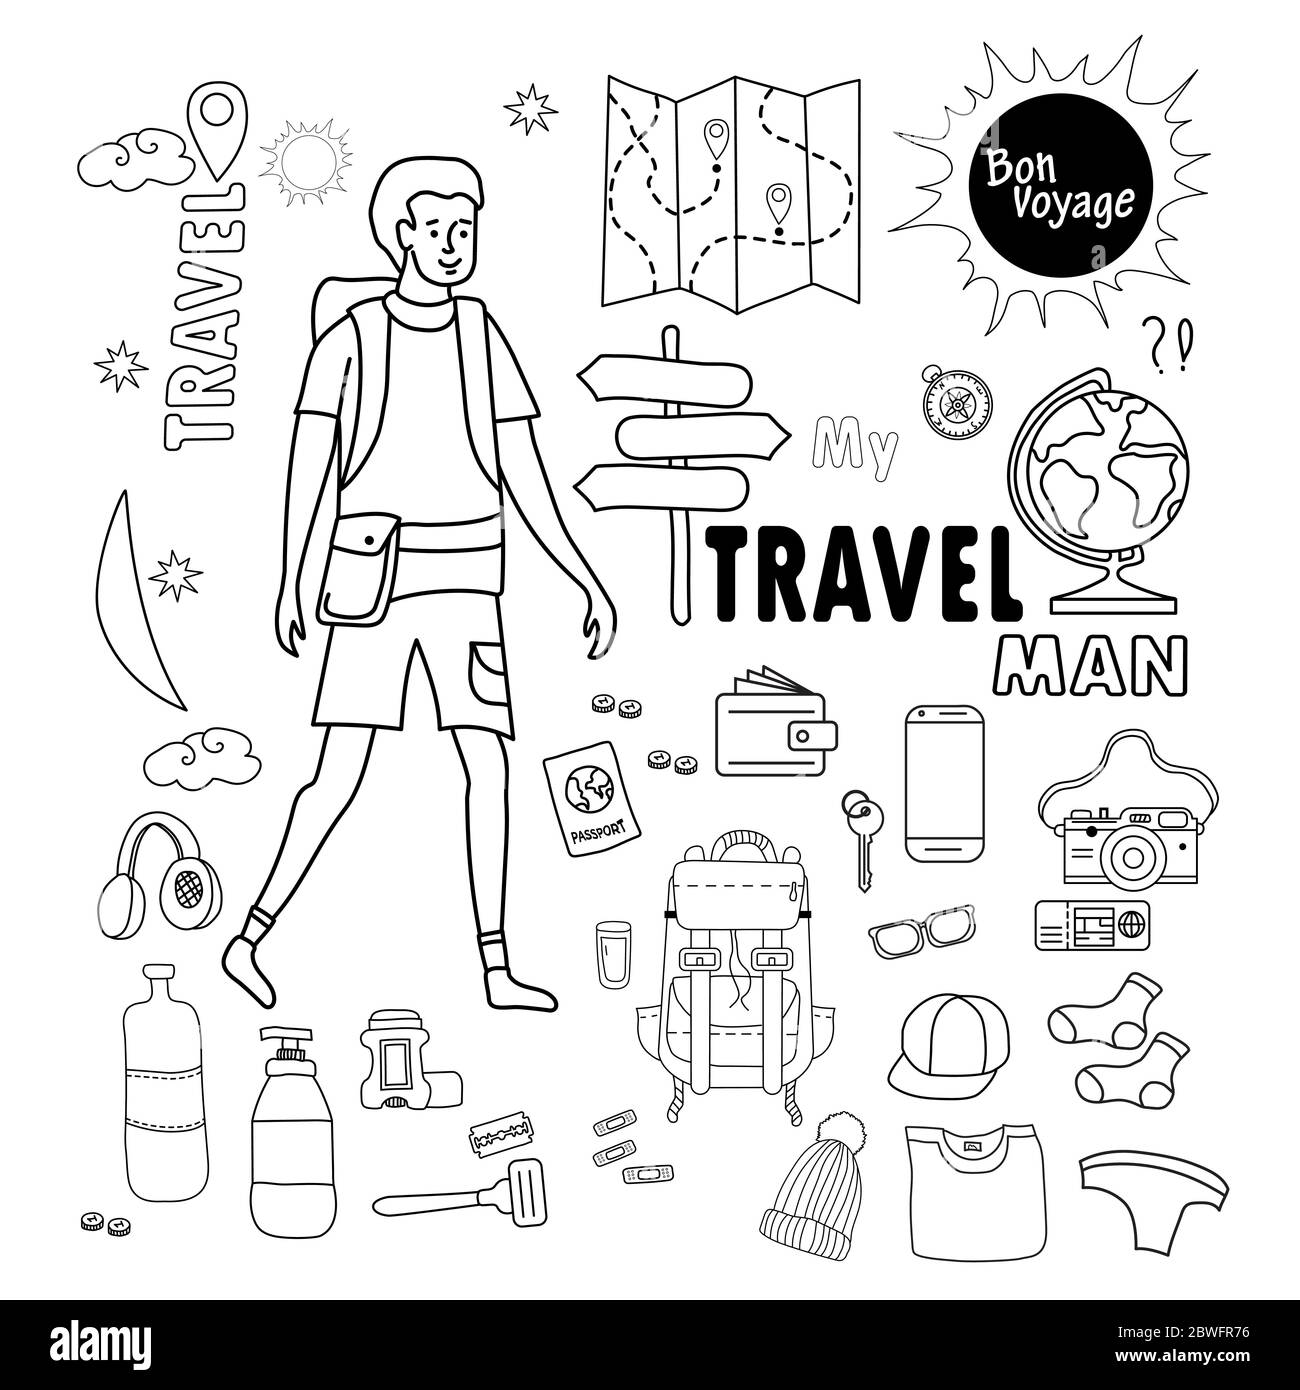 man tourist. Doodle travel stuff for men. Set of images Travel and vacation - luggage, things, clothes and shoes, hygiene items and documents. All Stock Vector